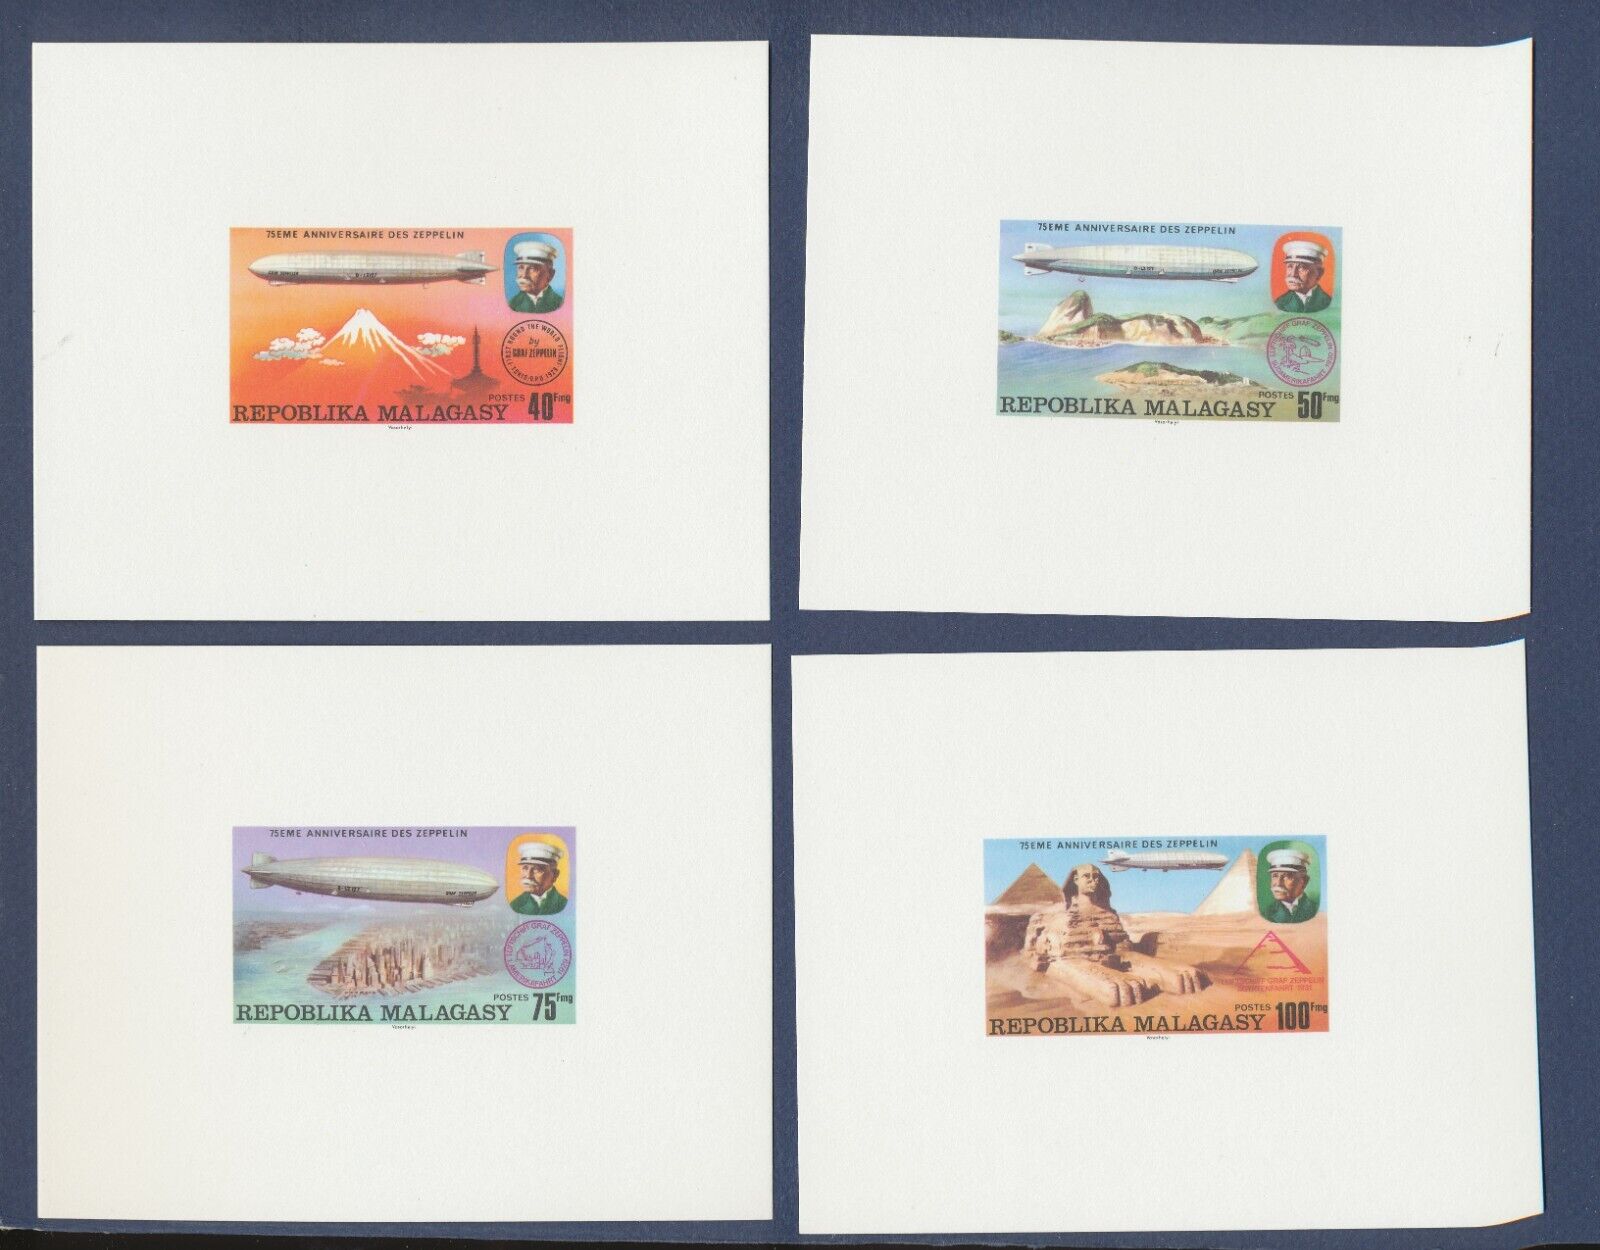 MALAGASY - Scott 545-548, C158-C159 - MNH proof cards - Zeppelin, 1976, two pix